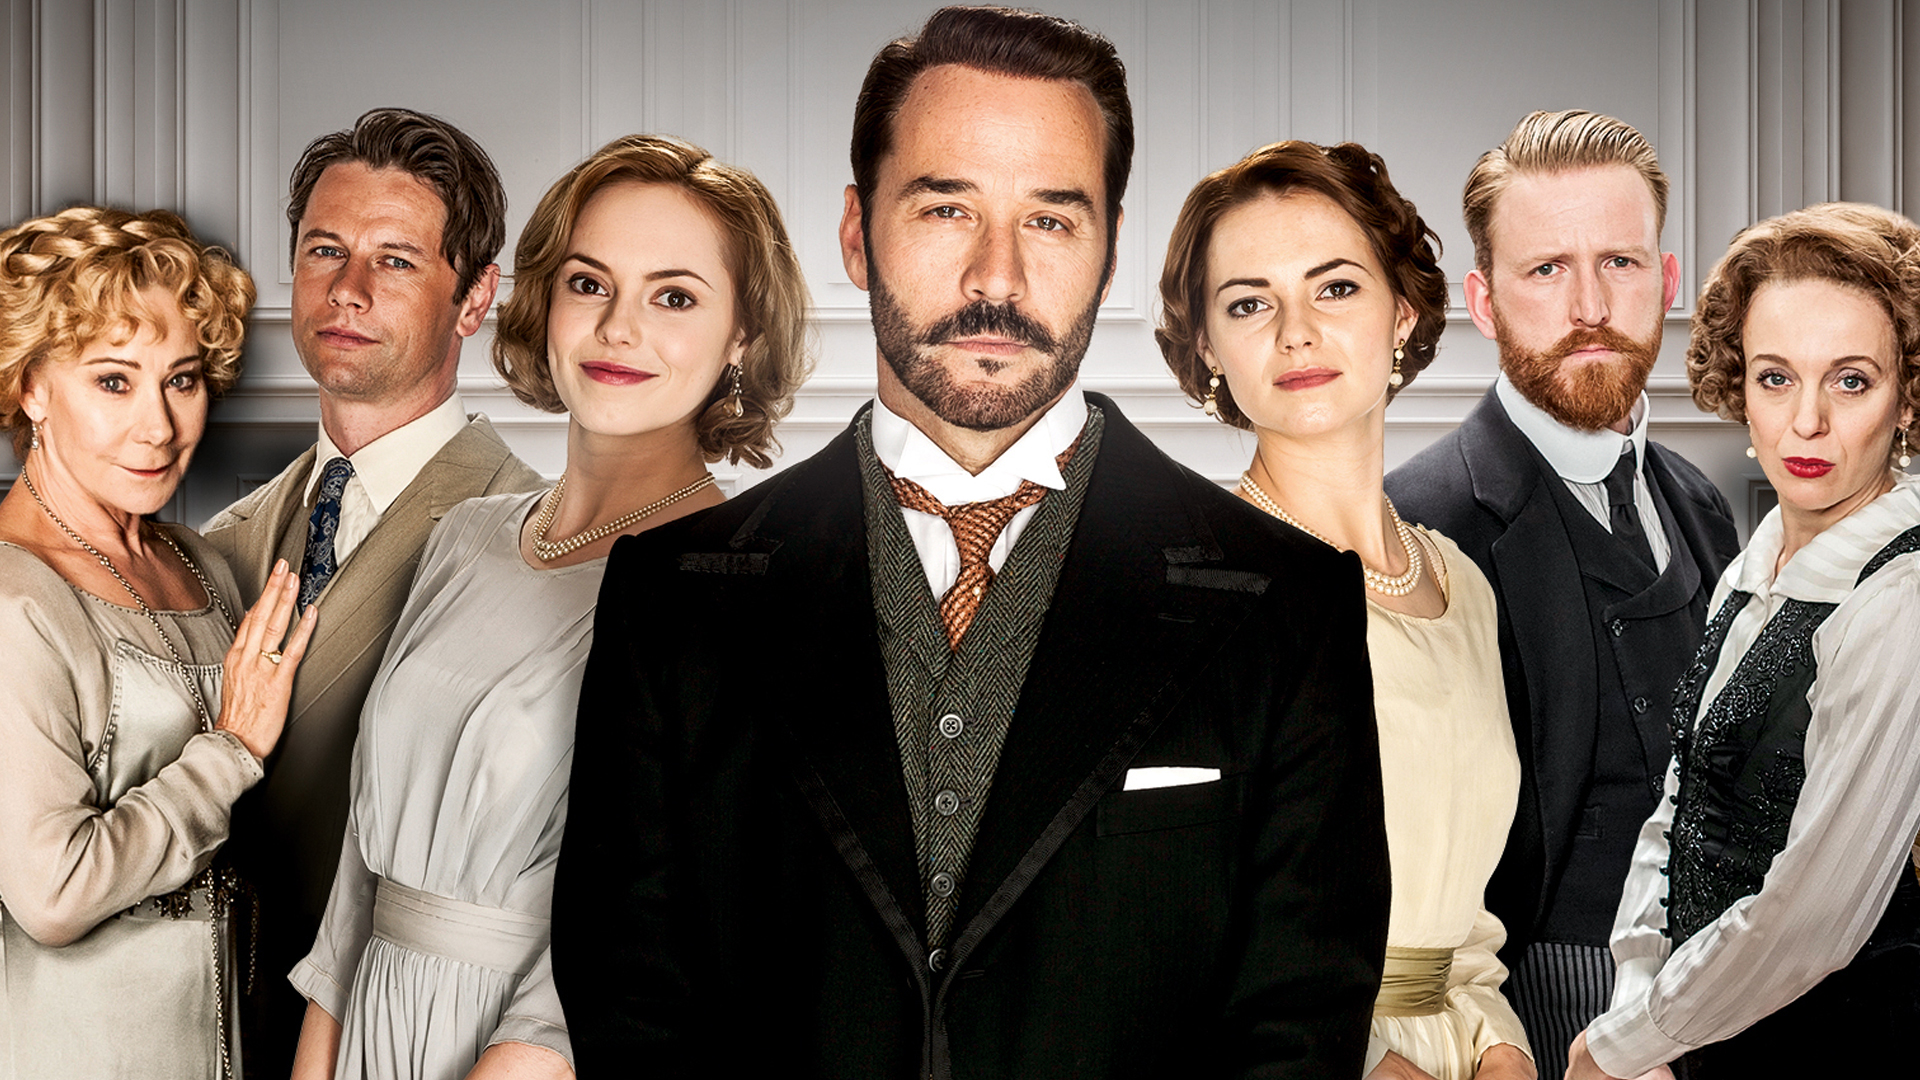 Will there be a season 5 of Mr Selfridge?